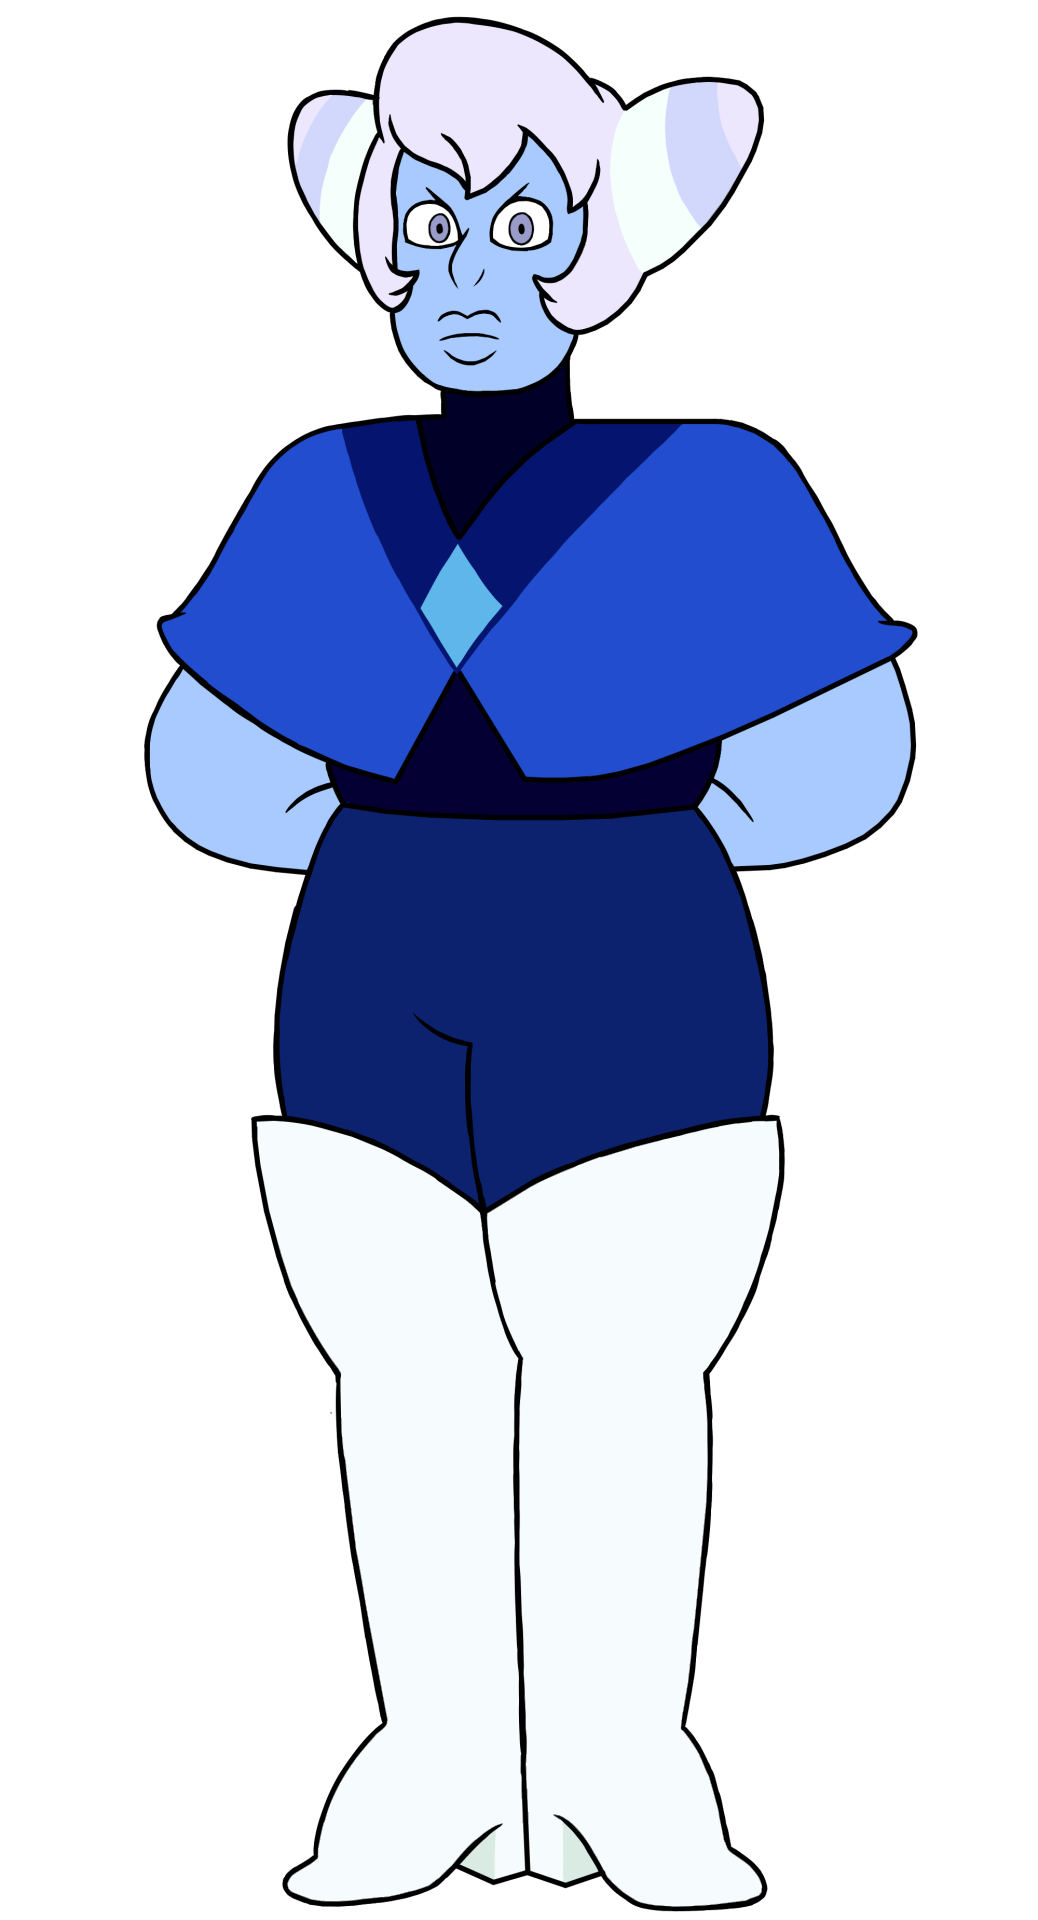 Image - Holly Blue Agate 1.png | Villains Wiki | FANDOM powered by Wikia